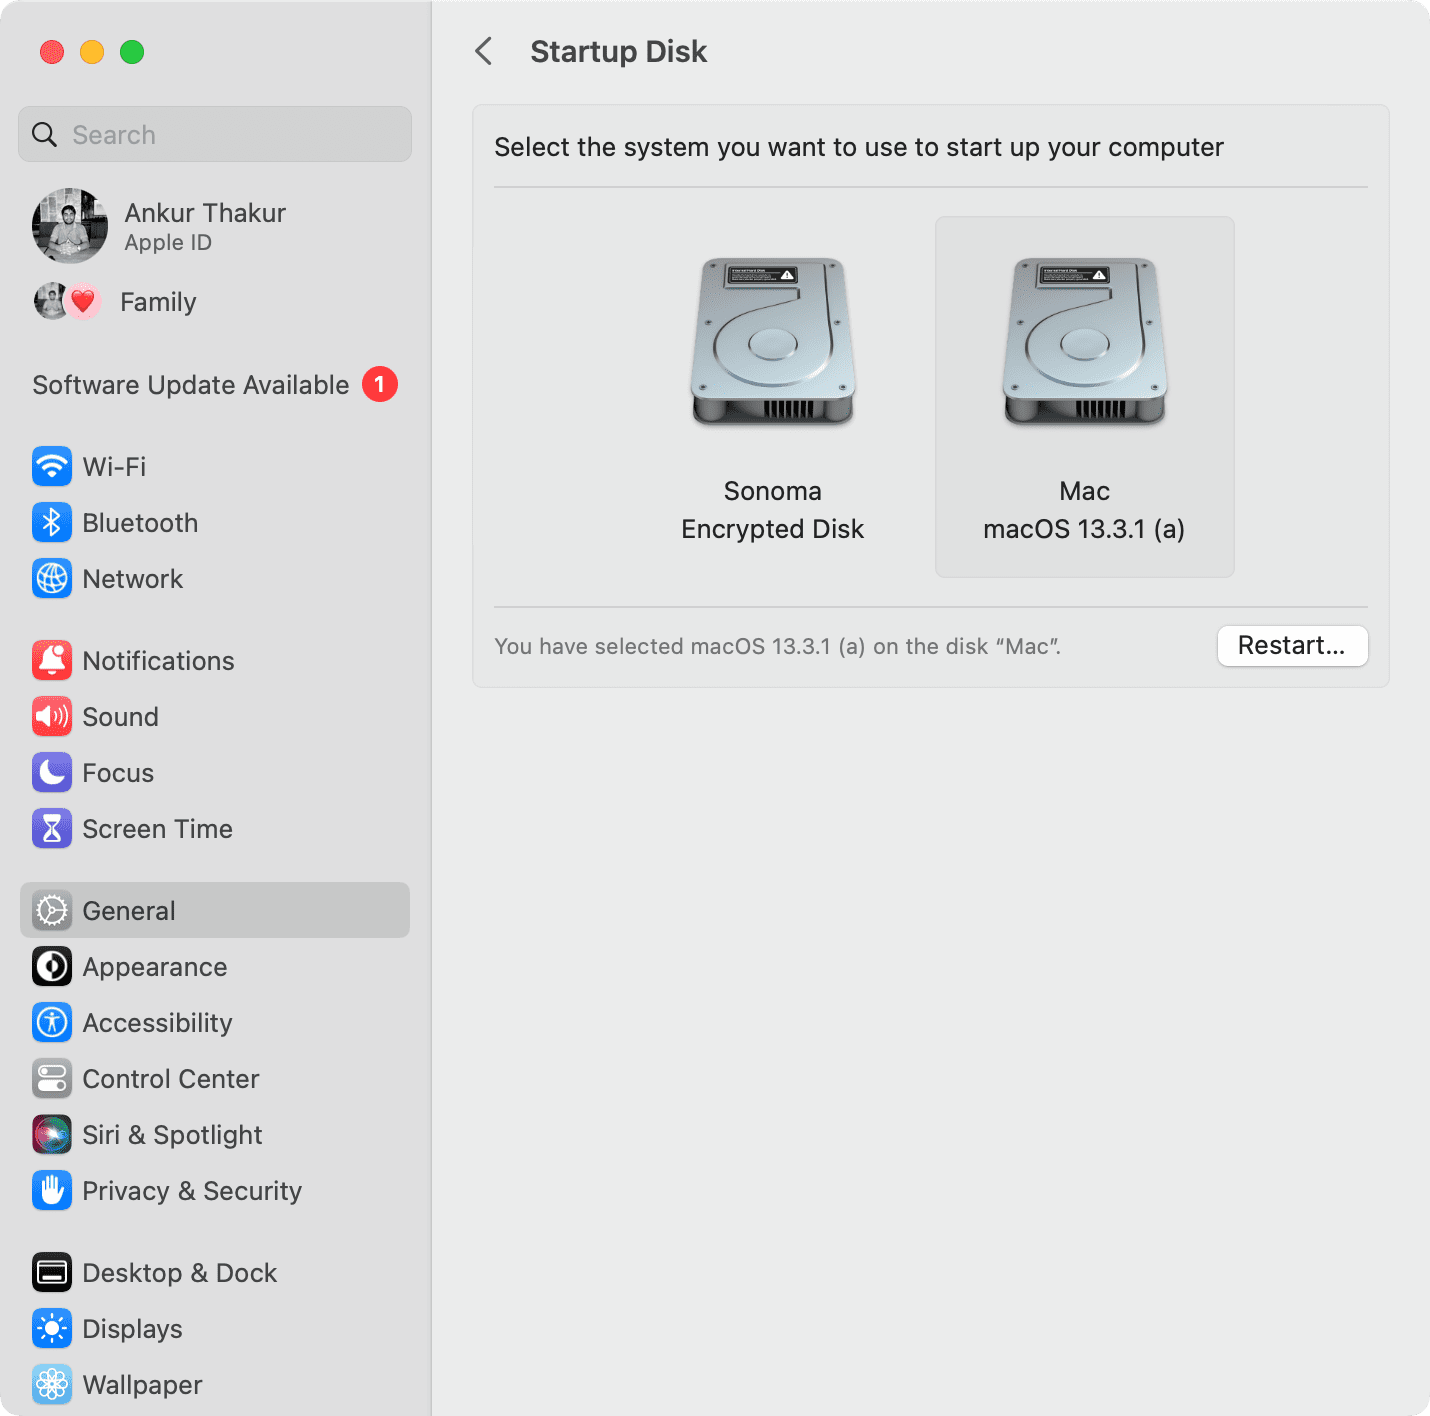 Select startup disk on Mac from System Settings